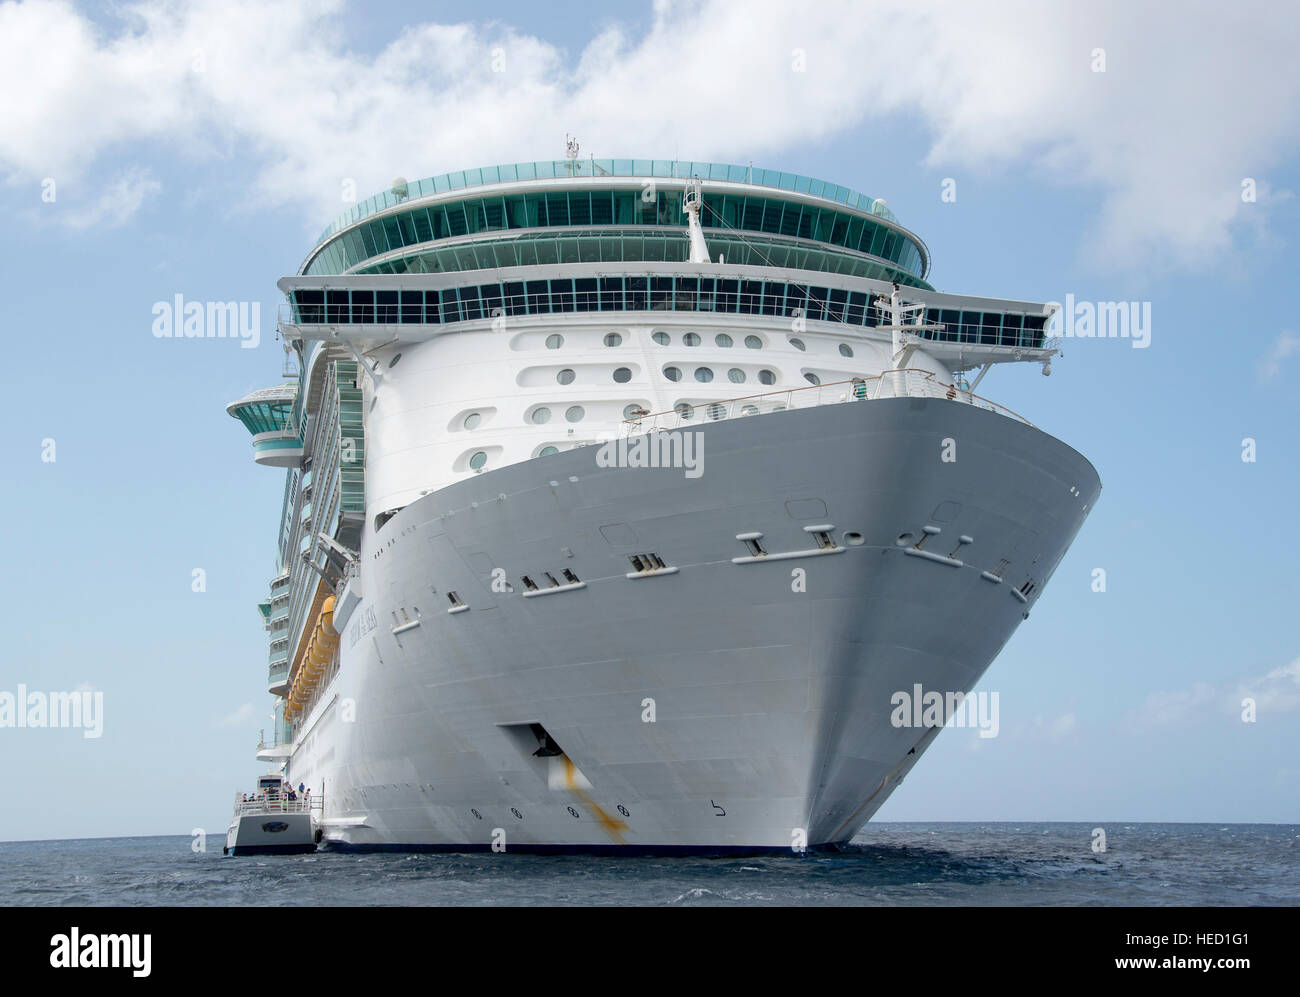 The Royal Caribbean Freedom of the Seas, which carries 4,515 passengers and 1,360 crew, and the Celebrity Reflection, which carries 3,609 passengers and 1271 crew, in the harbor of George Town, Grand Cayman in the Cayman Islands on Tuesday, December 20, 2016.  The smaller boat alongside the ship is a tender to ferry passengers back and forth to the island. Credit: Ron Sachs / CNP /MediaPunch Stock Photo